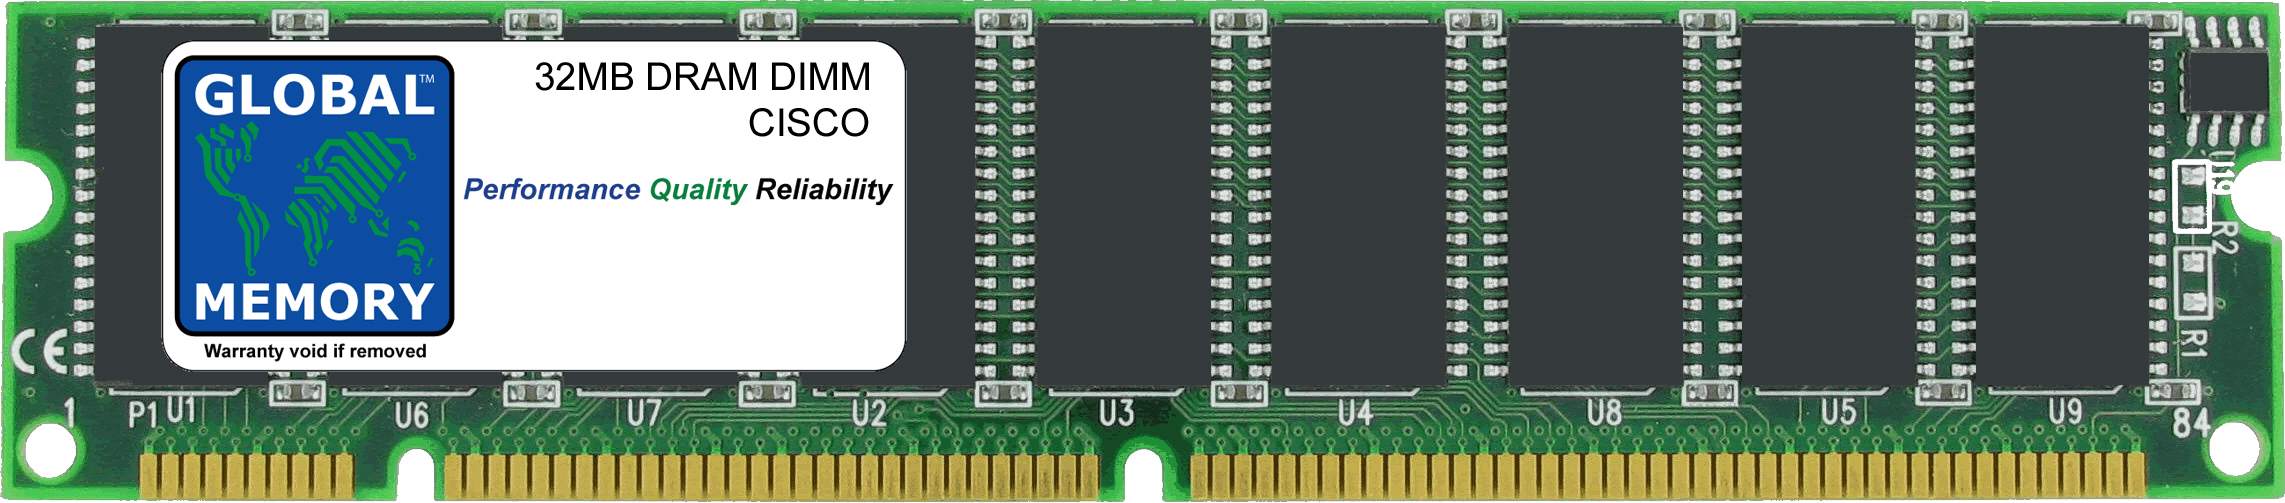 32MB DRAM DIMM MEMORY RAM FOR CISCO 7500 SERIES ROUTERS ROUTE SWITCH PROCESSOR 4 (MEM-RSP4-32M) - Click Image to Close